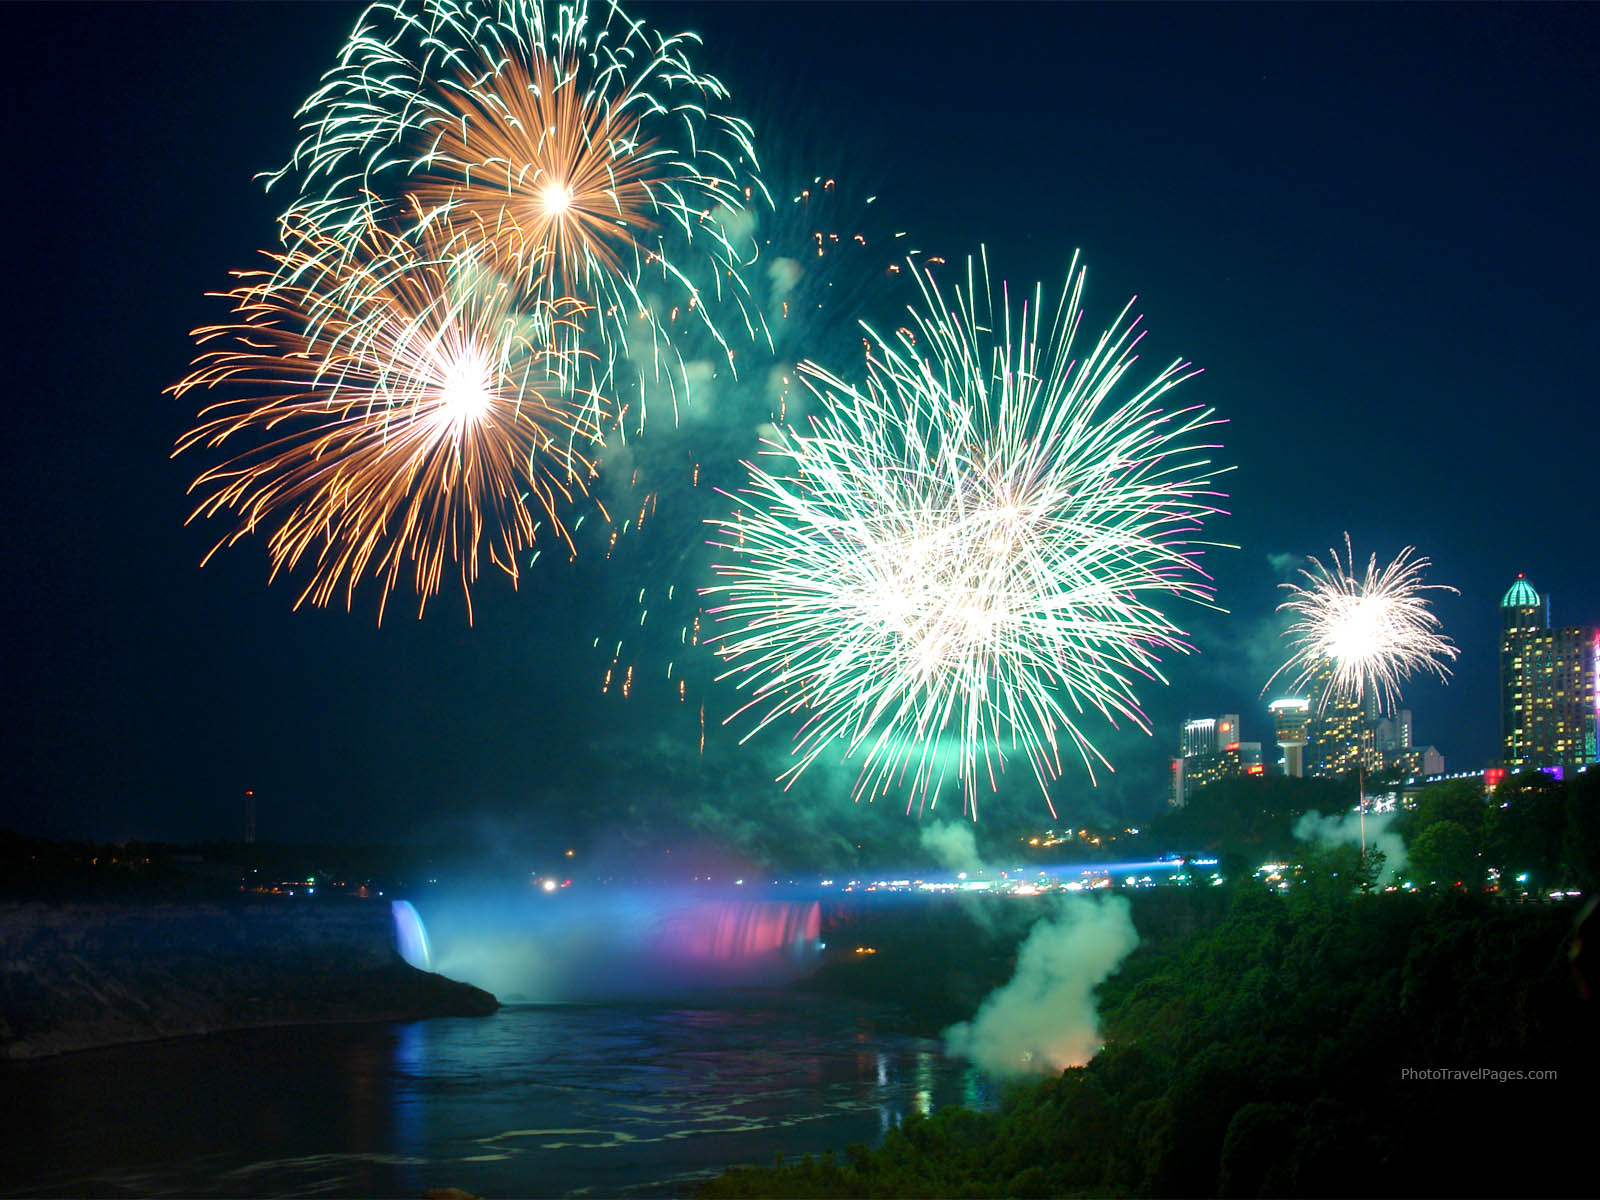 Travel & Truffles...: Happy 4th of July! I'm going to Canada!